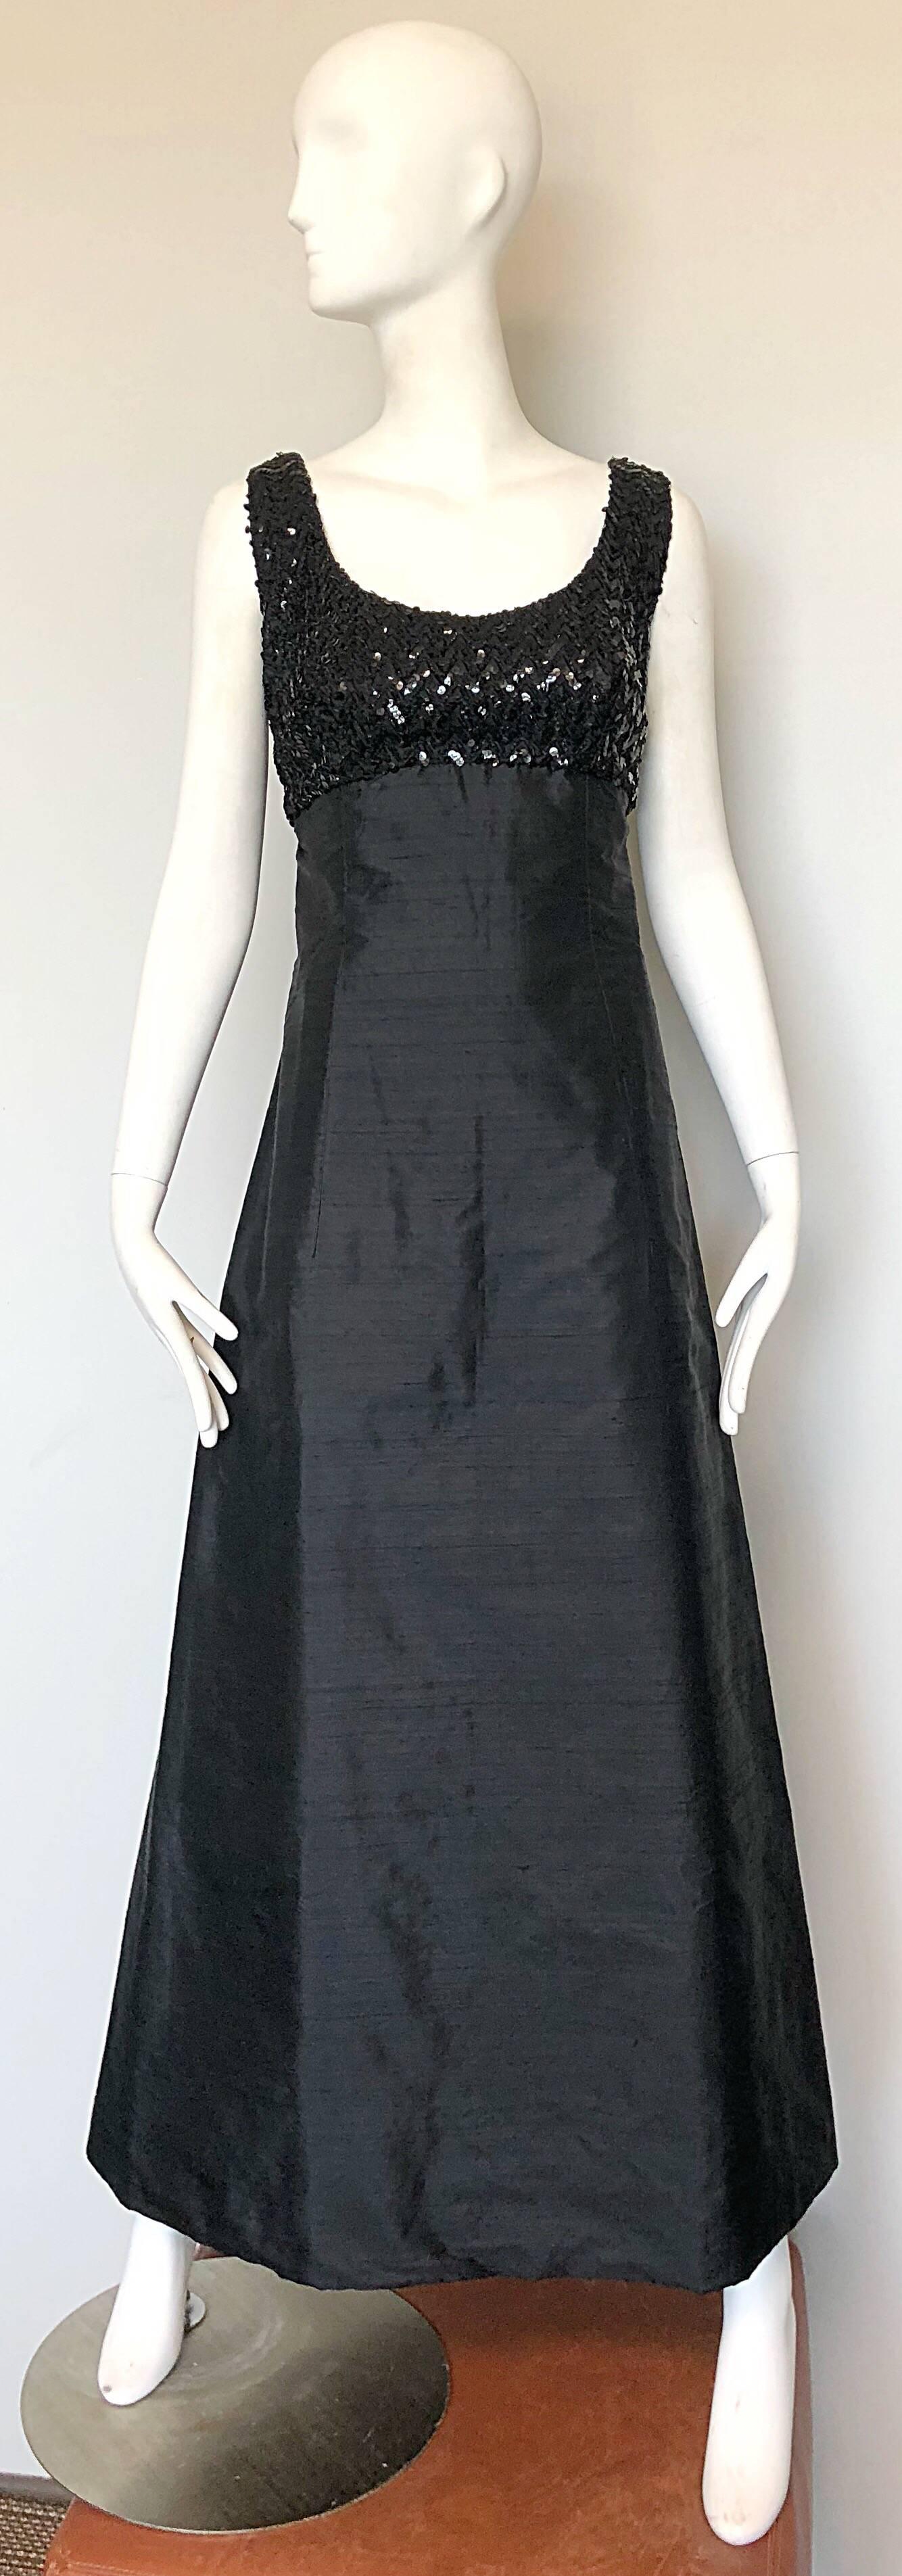 Stunning 1960s BIBA black silk shantung bell shaped full length sleeveless evening dress! Features hundreds of hand sewn black sequins on the fitted bodice. Raw silk shantung body with a flared hem. Full metal zipper up the back with hook-and-eye